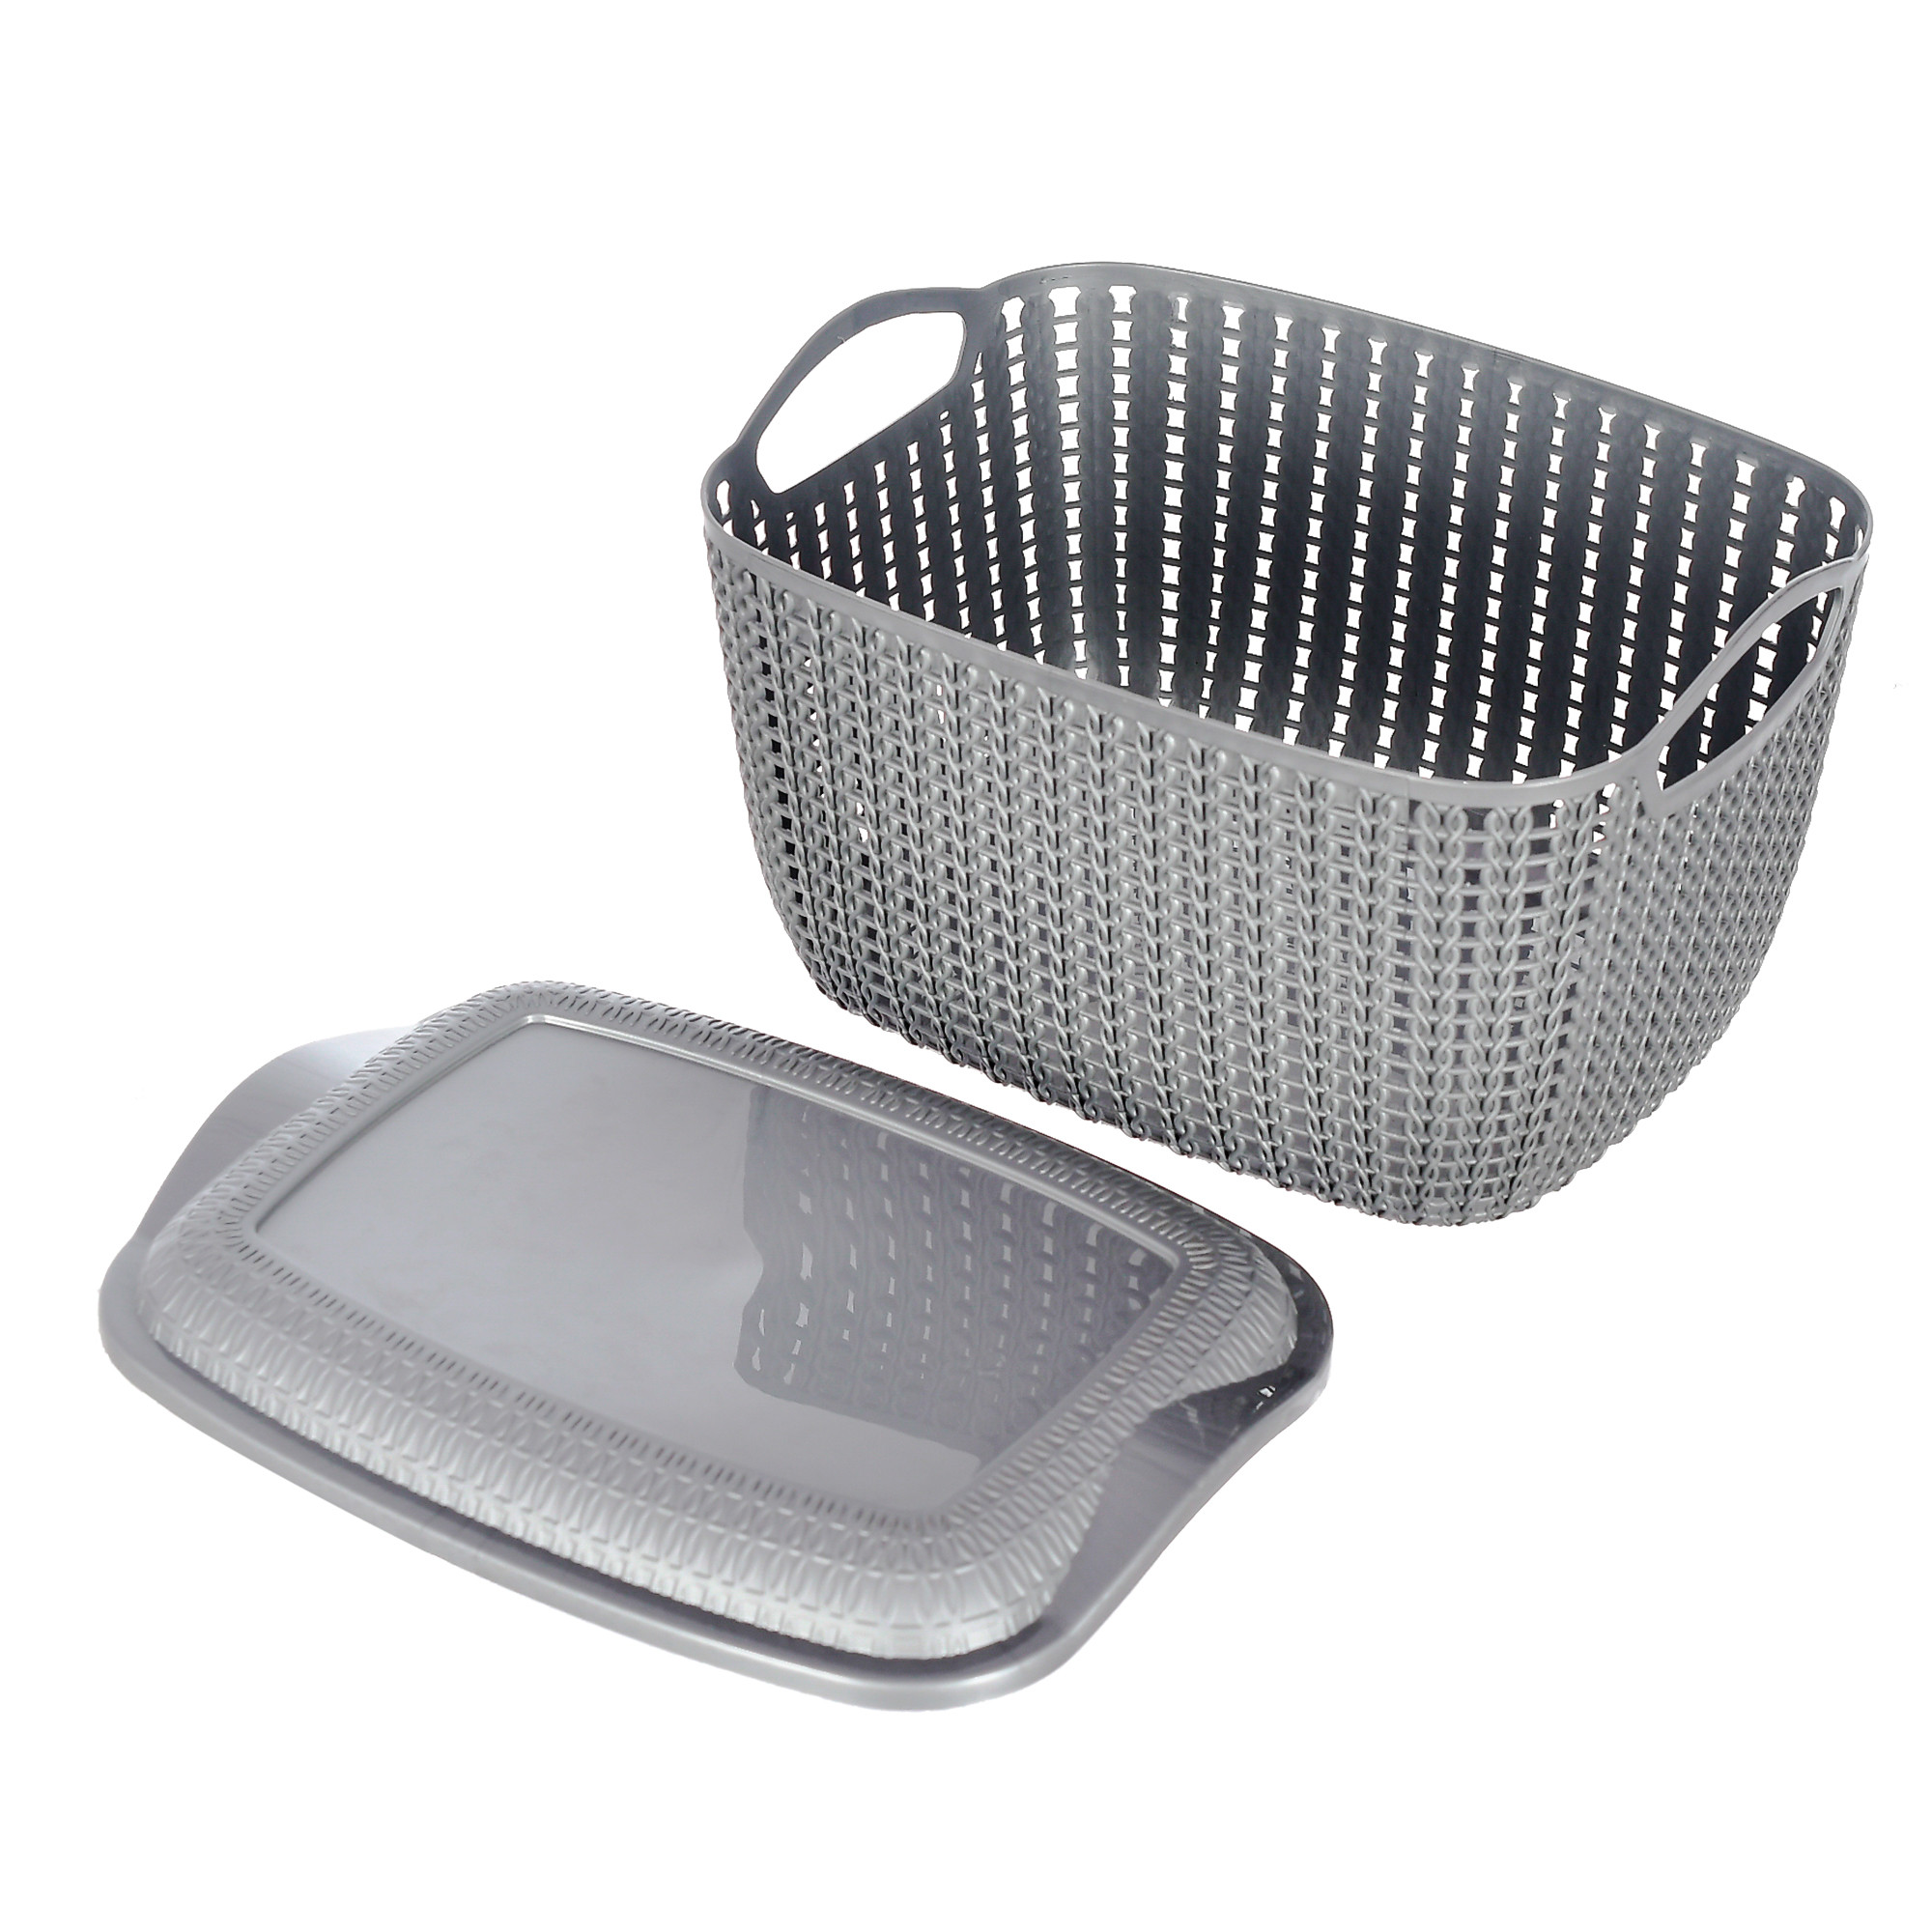 Kuber Industries Multiuses Small M 25 Plastic Basket/Organizer With Lid- Pack of 3 (Grey & Brown & Grey) -46KM049